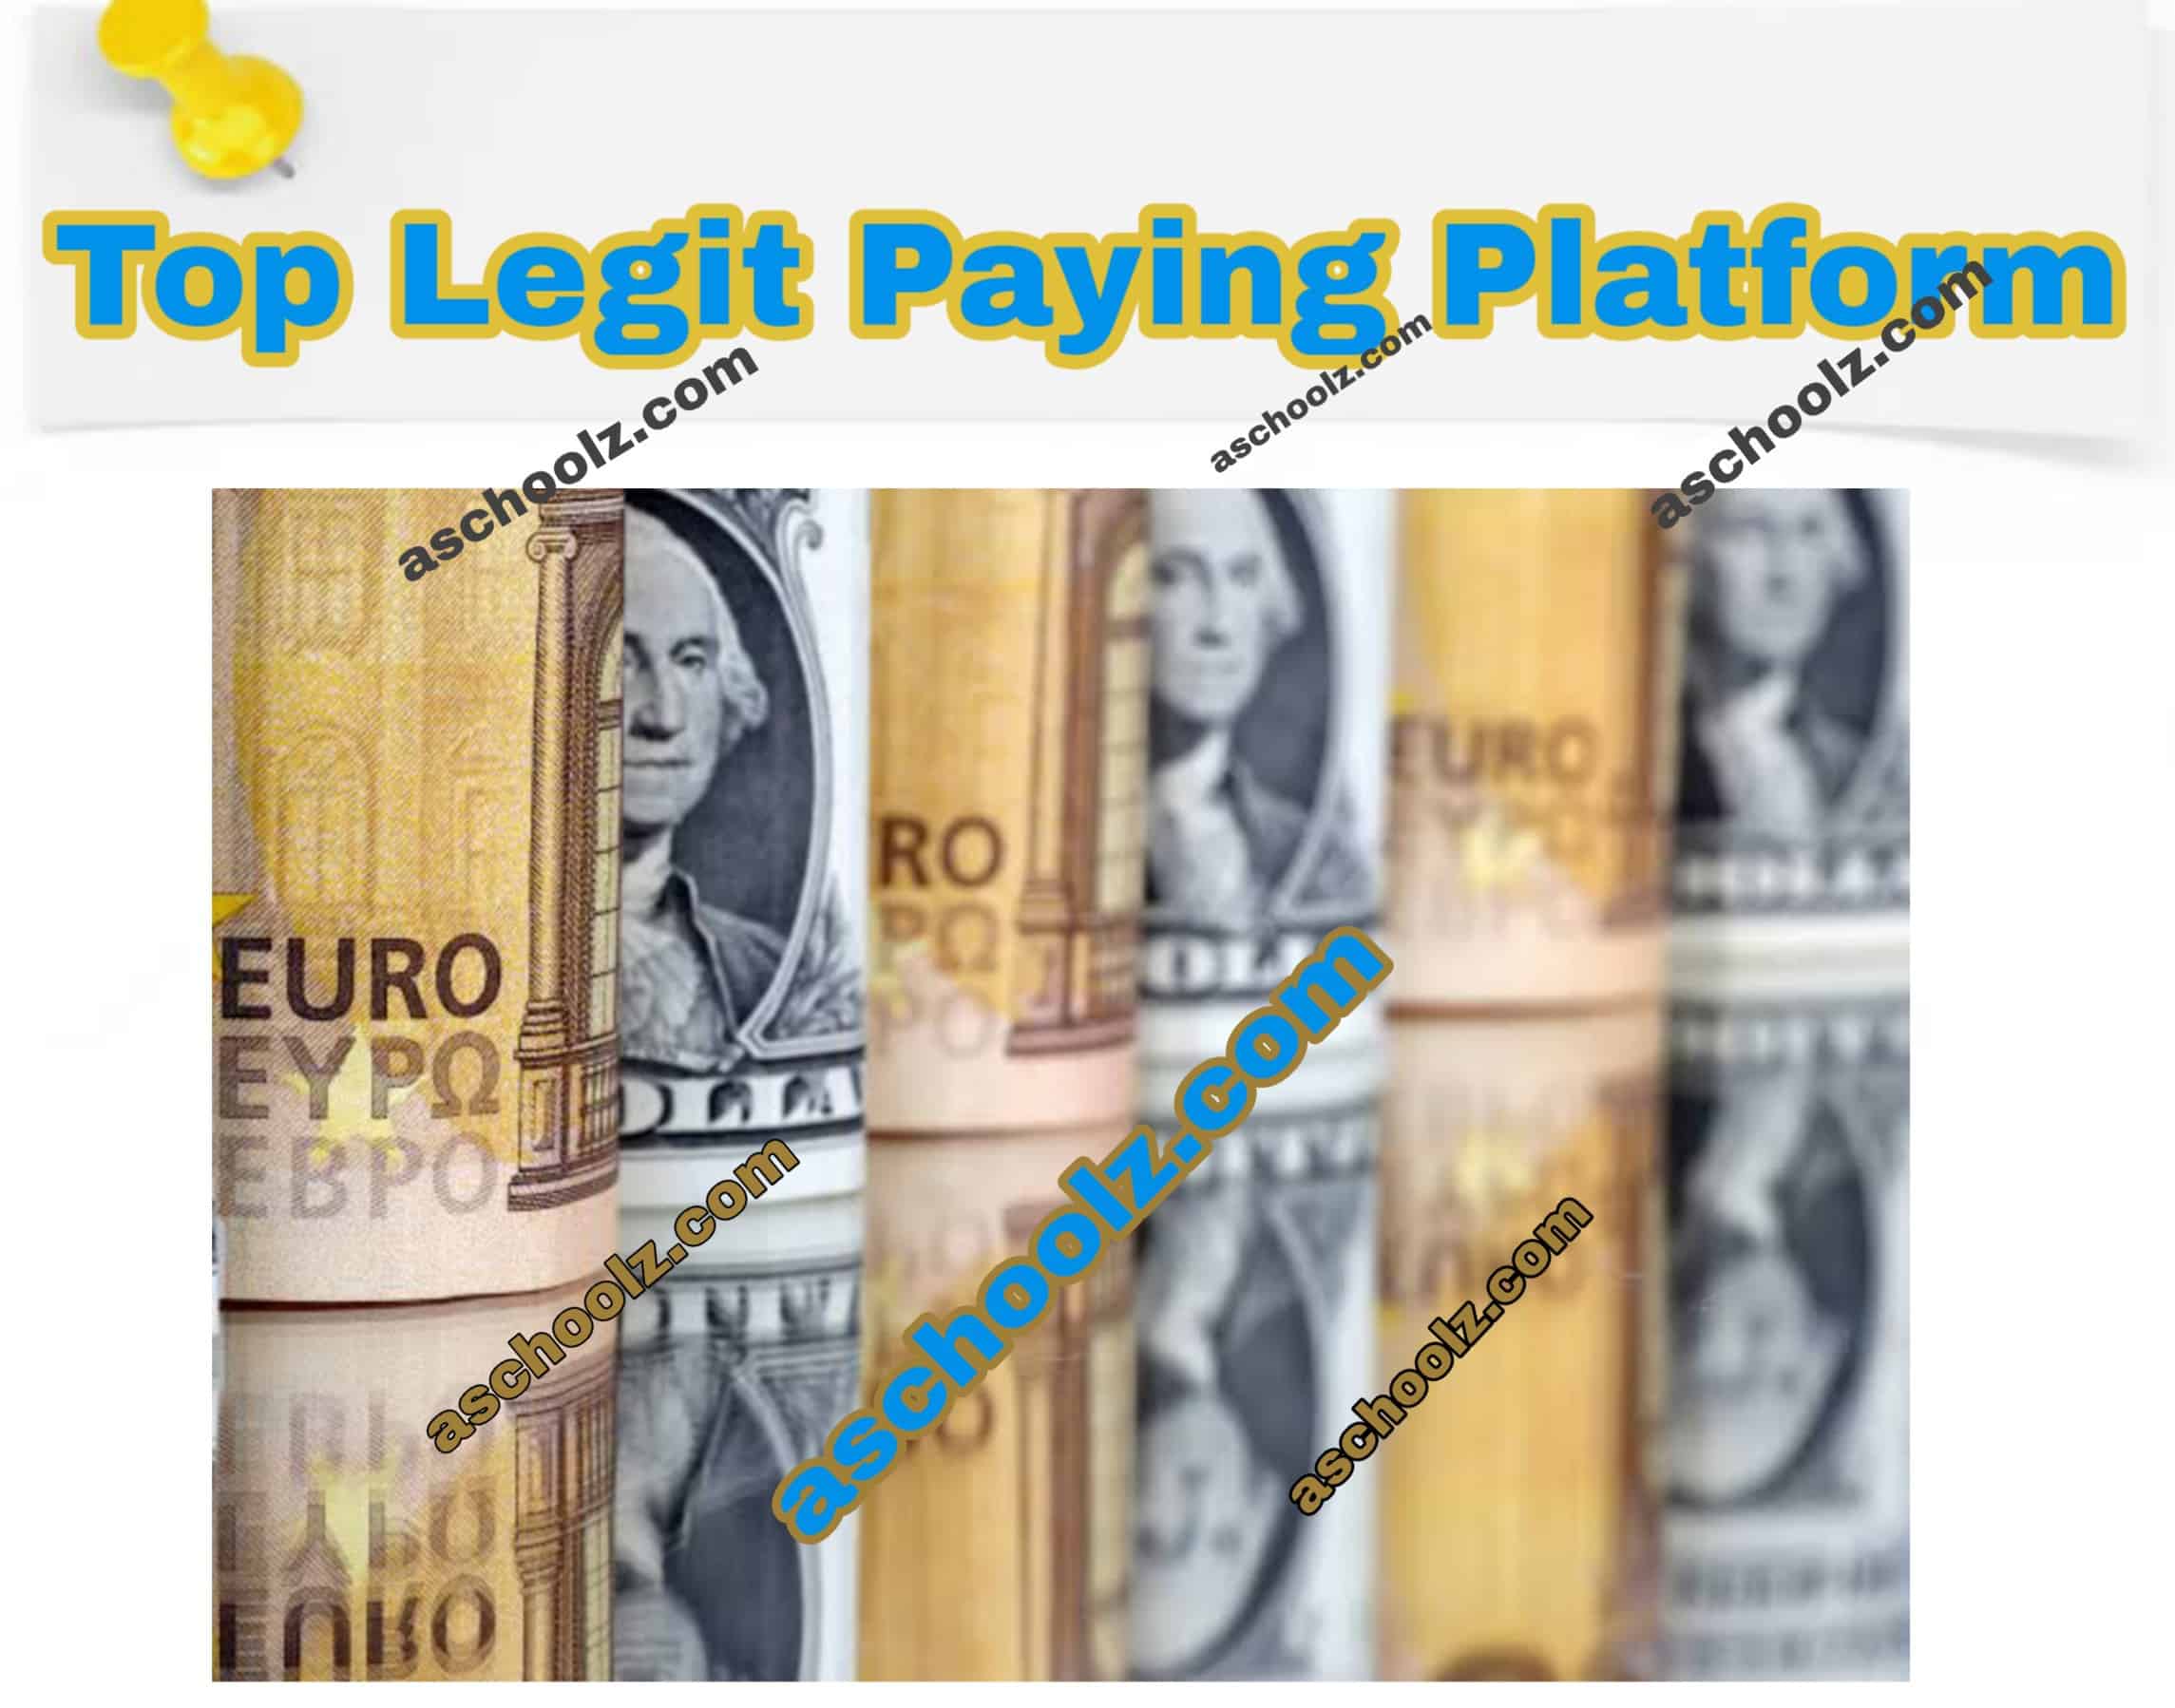 List of Top Paying Online Platform